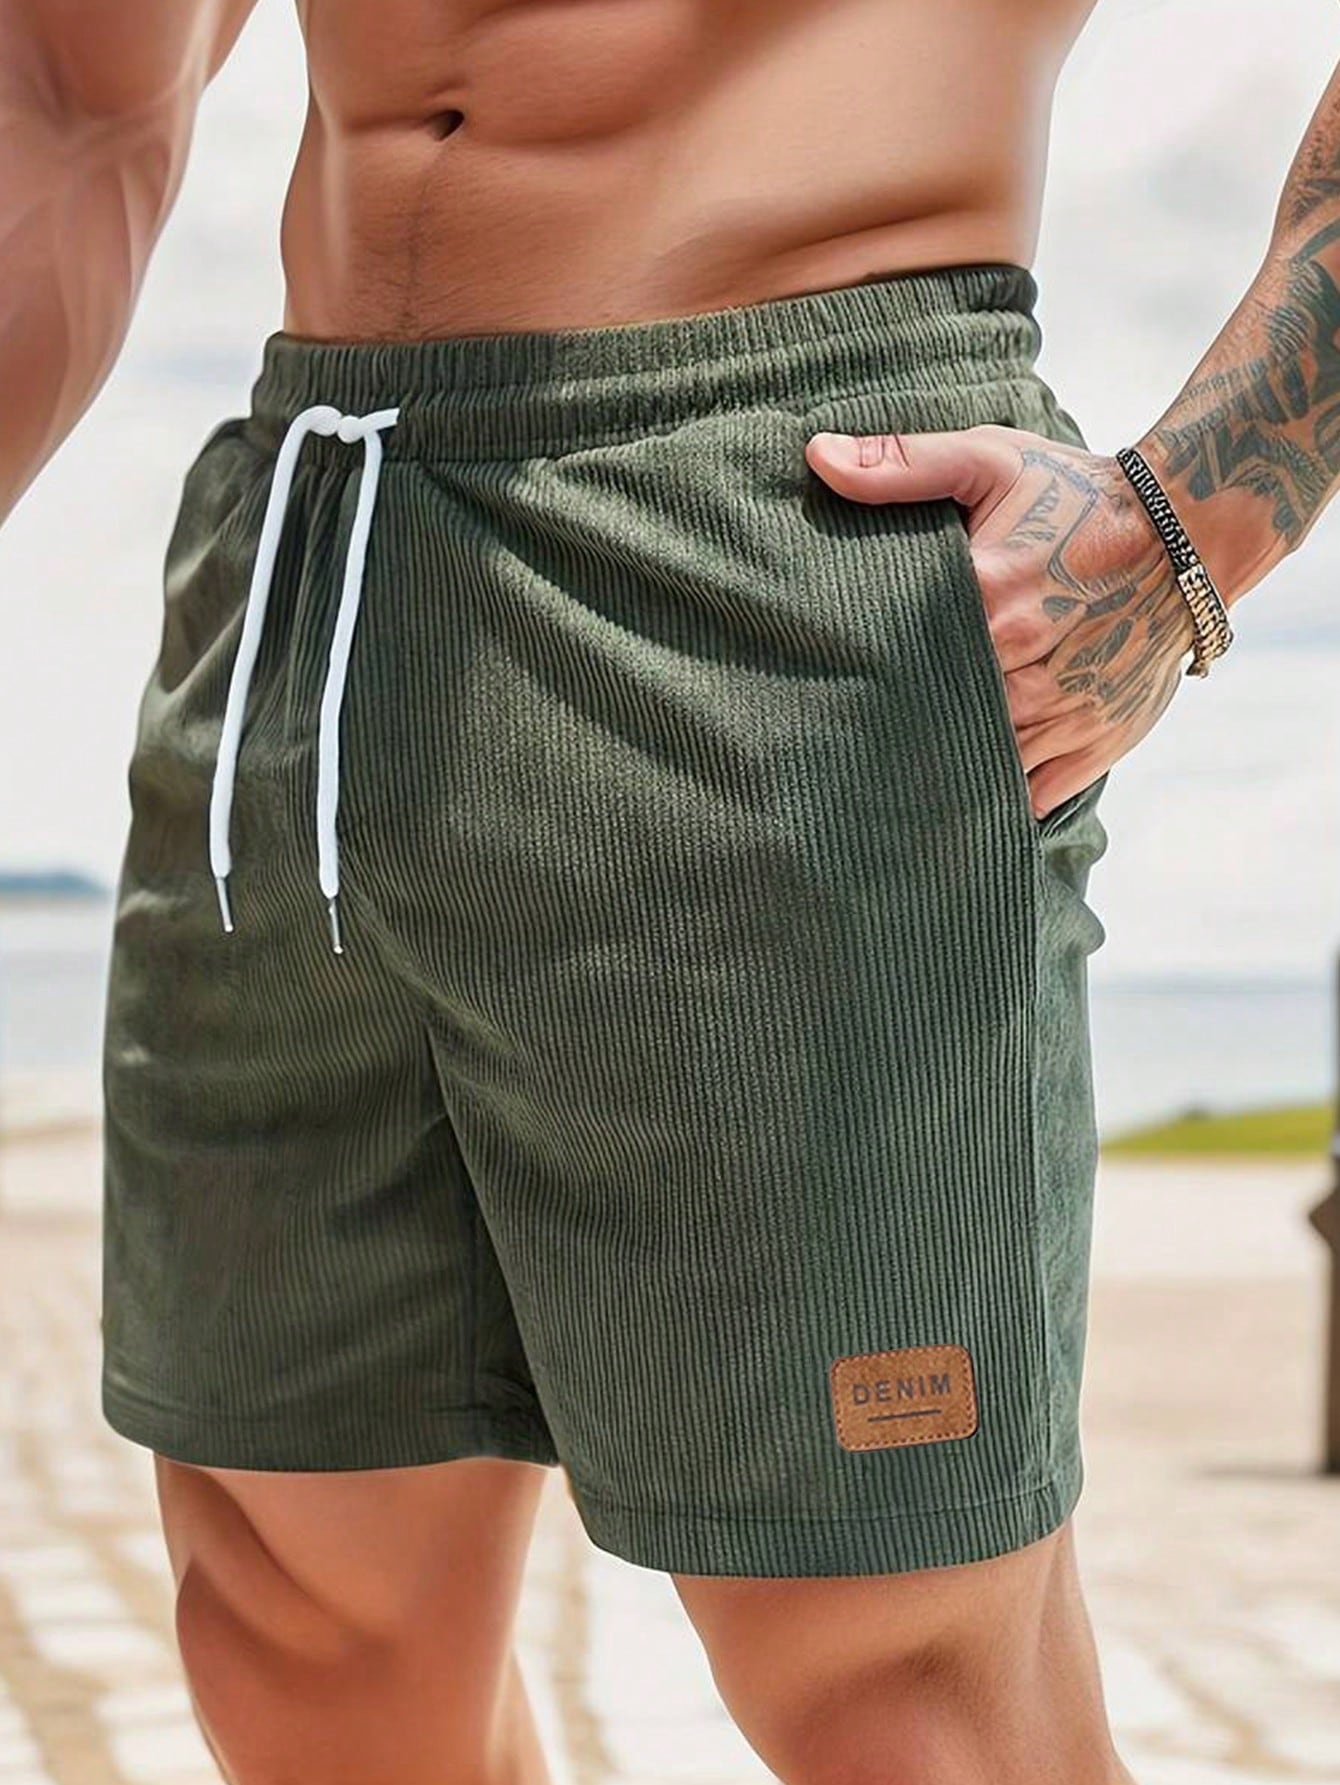 Men's Casual Drawstring Shorts with Pockets - Loose Fit, Solid Color, Summer Style